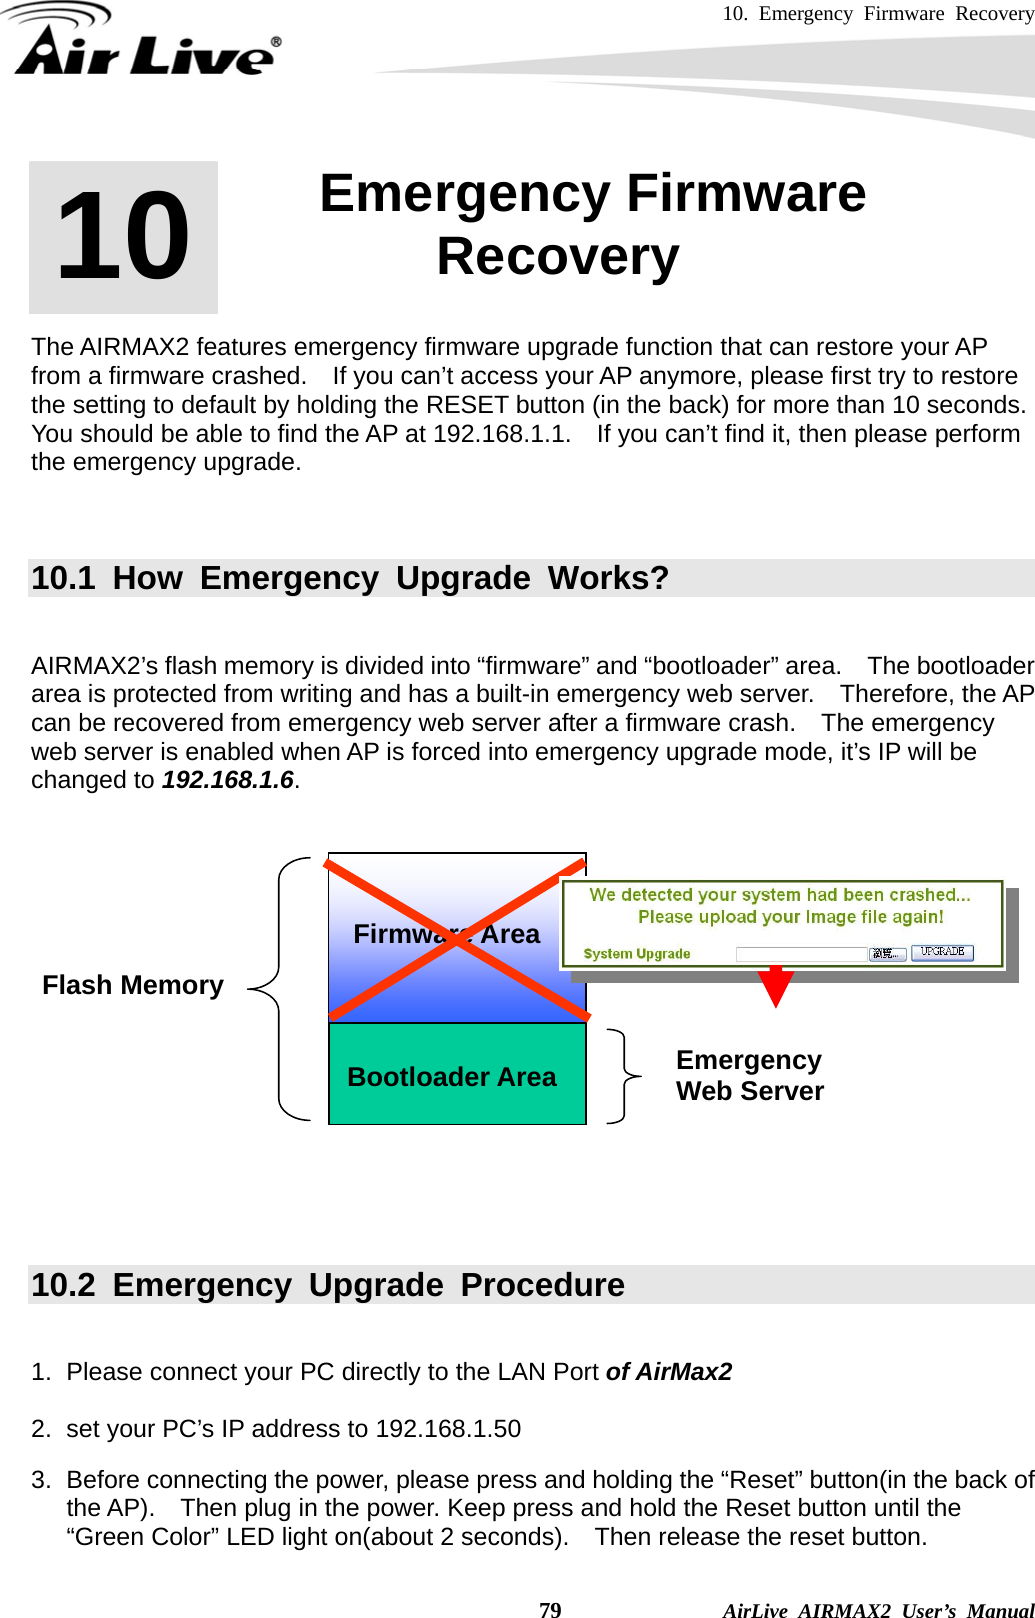 10. Emergency Firmware Recovery    79              AirLive AIRMAX2 User’s Manual       The AIRMAX2 features emergency firmware upgrade function that can restore your AP from a firmware crashed.    If you can’t access your AP anymore, please first try to restore the setting to default by holding the RESET button (in the back) for more than 10 seconds. You should be able to find the AP at 192.168.1.1.    If you can’t find it, then please perform the emergency upgrade.       10.1 How Emergency Upgrade Works?   AIRMAX2’s flash memory is divided into “firmware” and “bootloader” area.    The bootloader area is protected from writing and has a built-in emergency web server.   Therefore, the AP can be recovered from emergency web server after a firmware crash.    The emergency web server is enabled when AP is forced into emergency upgrade mode, it’s IP will be changed to 192.168.1.6.        10.2 Emergency Upgrade Procedure  1.  Please connect your PC directly to the LAN Port of AirMax2  2.  set your PC’s IP address to 192.168.1.50    3.  Before connecting the power, please press and holding the “Reset” button(in the back of the AP).    Then plug in the power. Keep press and hold the Reset button until the “Green Color” LED light on(about 2 seconds).    Then release the reset button. 10  10. Emergency Firmware Recovery  Bootloader Area Flash Memory Emergency  Web Server Firmware Area 